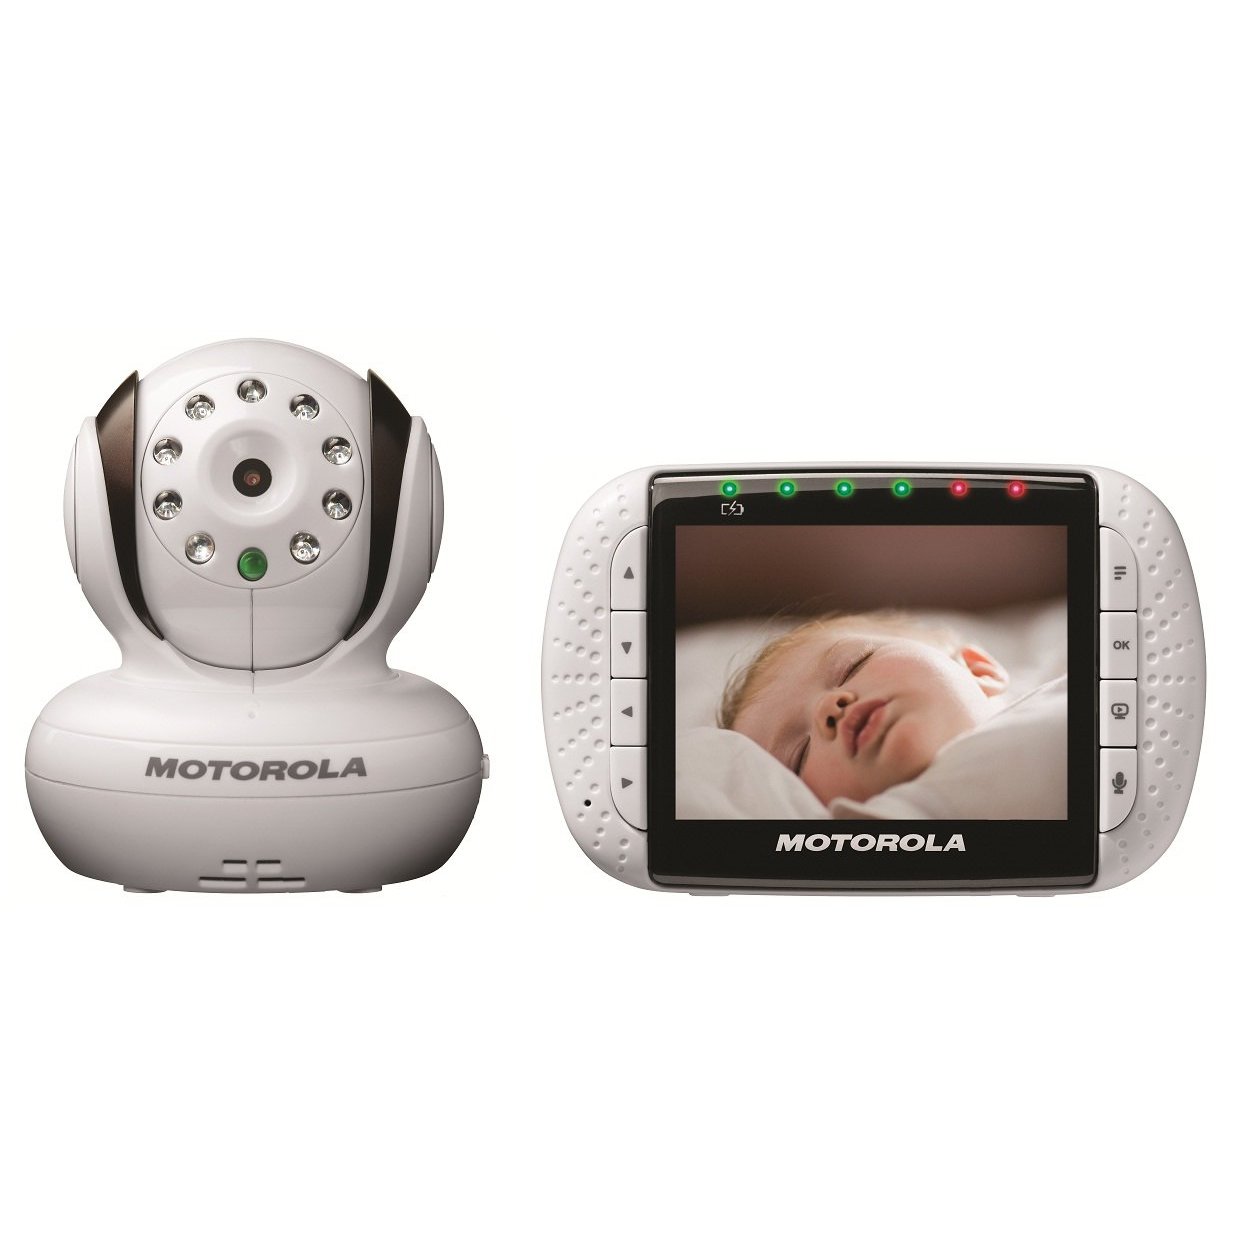 http://thetechjournal.com/wp-content/uploads/images/1110/1318126294-motorola-digital-video-baby-monitor-with-35-inch-color-lcd-screen-1.jpg